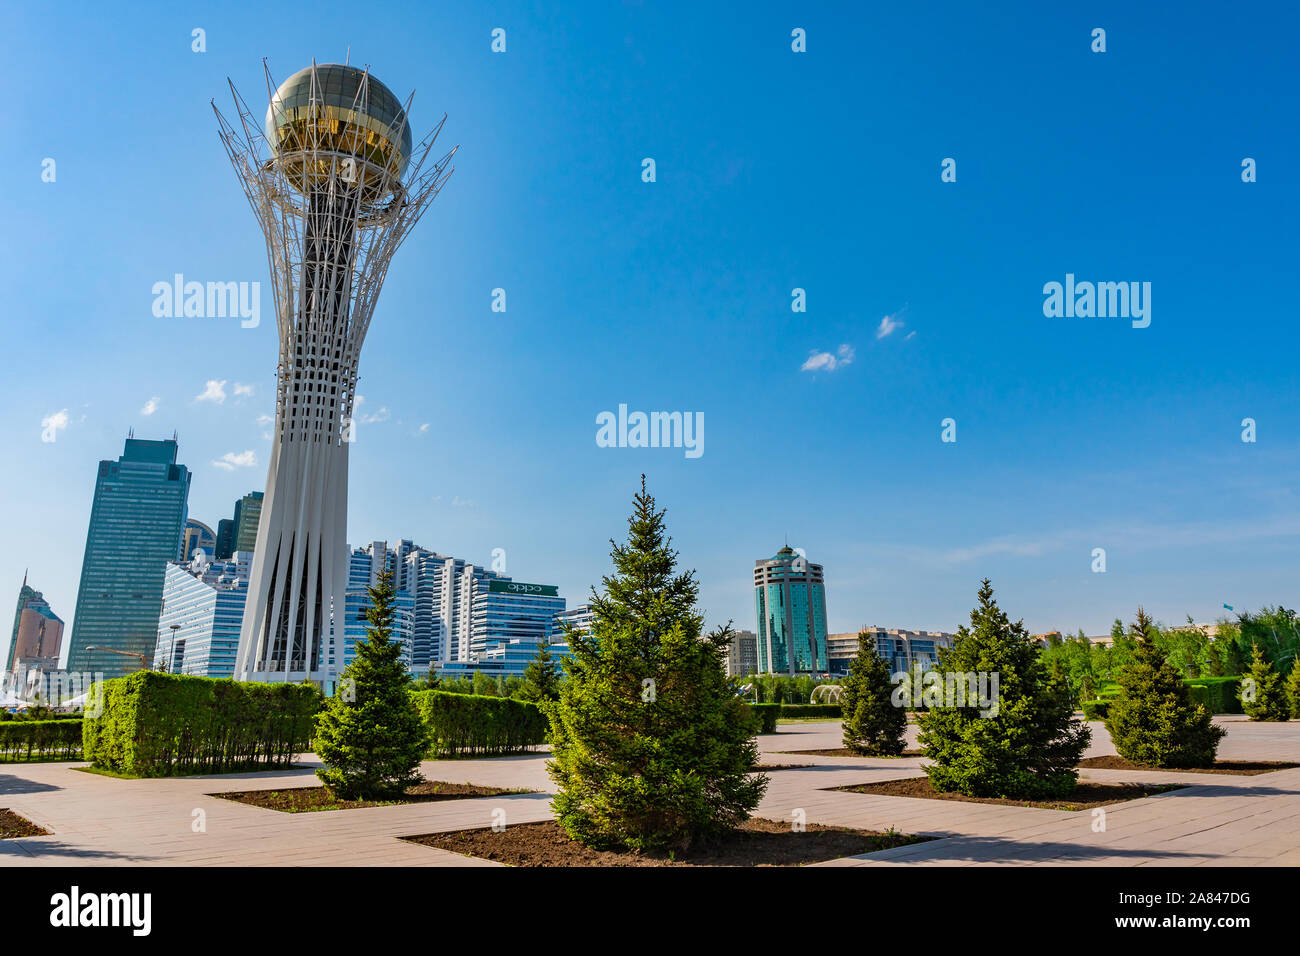 Nur-Sultan Astana Bayterek Tower Picturesque Frontal View on a Sunny Cloudy Blue Sky Day Stock Photo